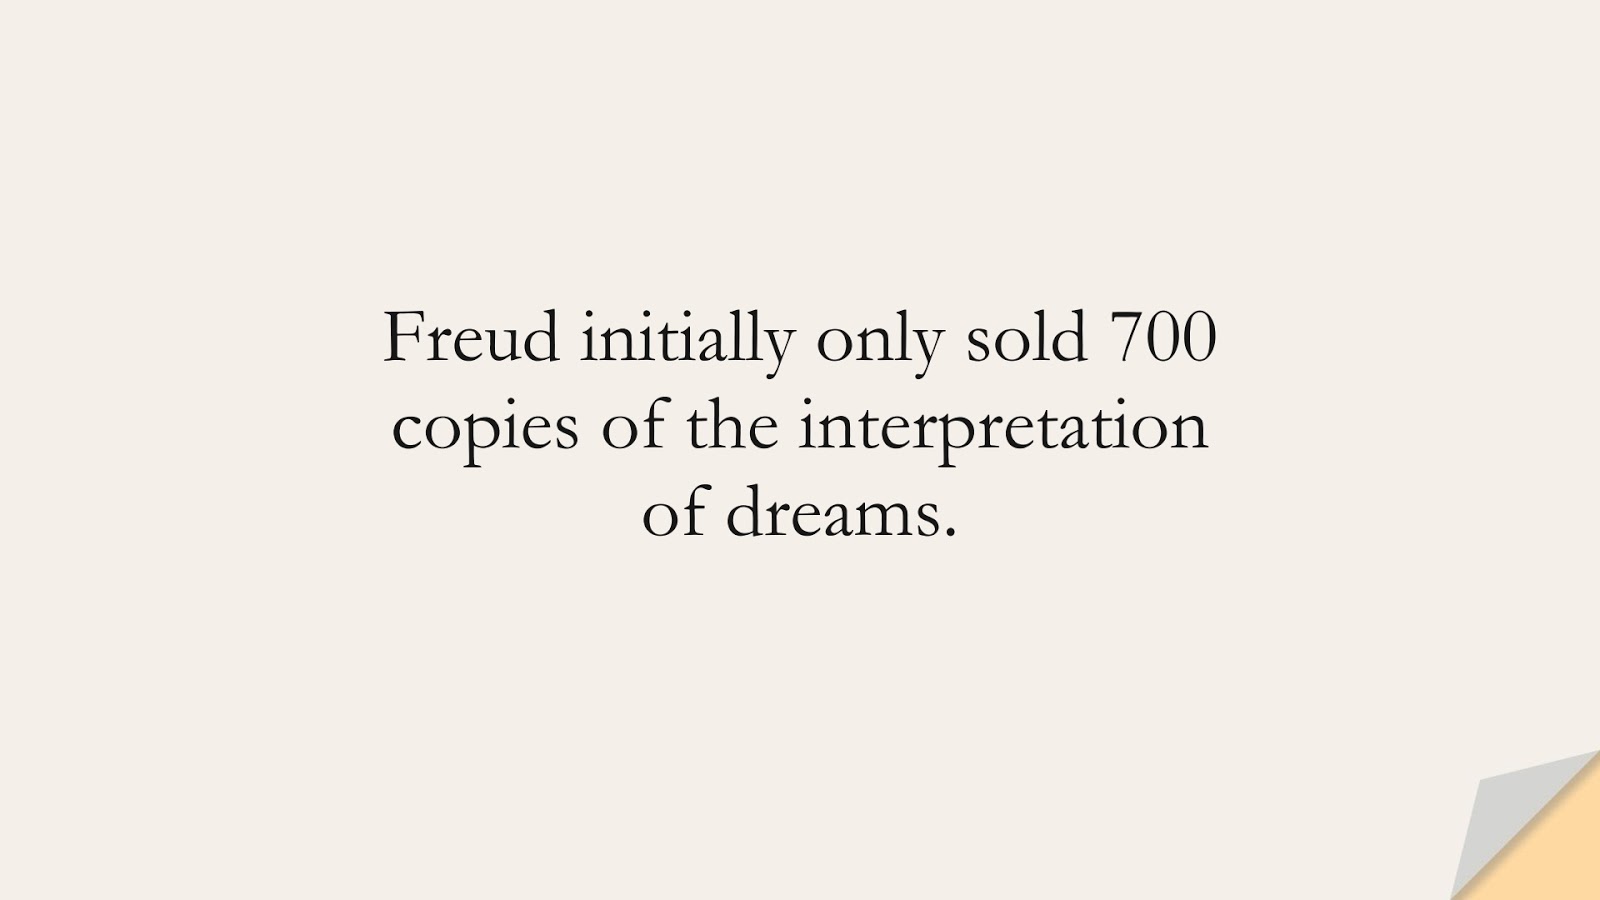 Freud initially only sold 700 copies of the interpretation of dreams.FALSE